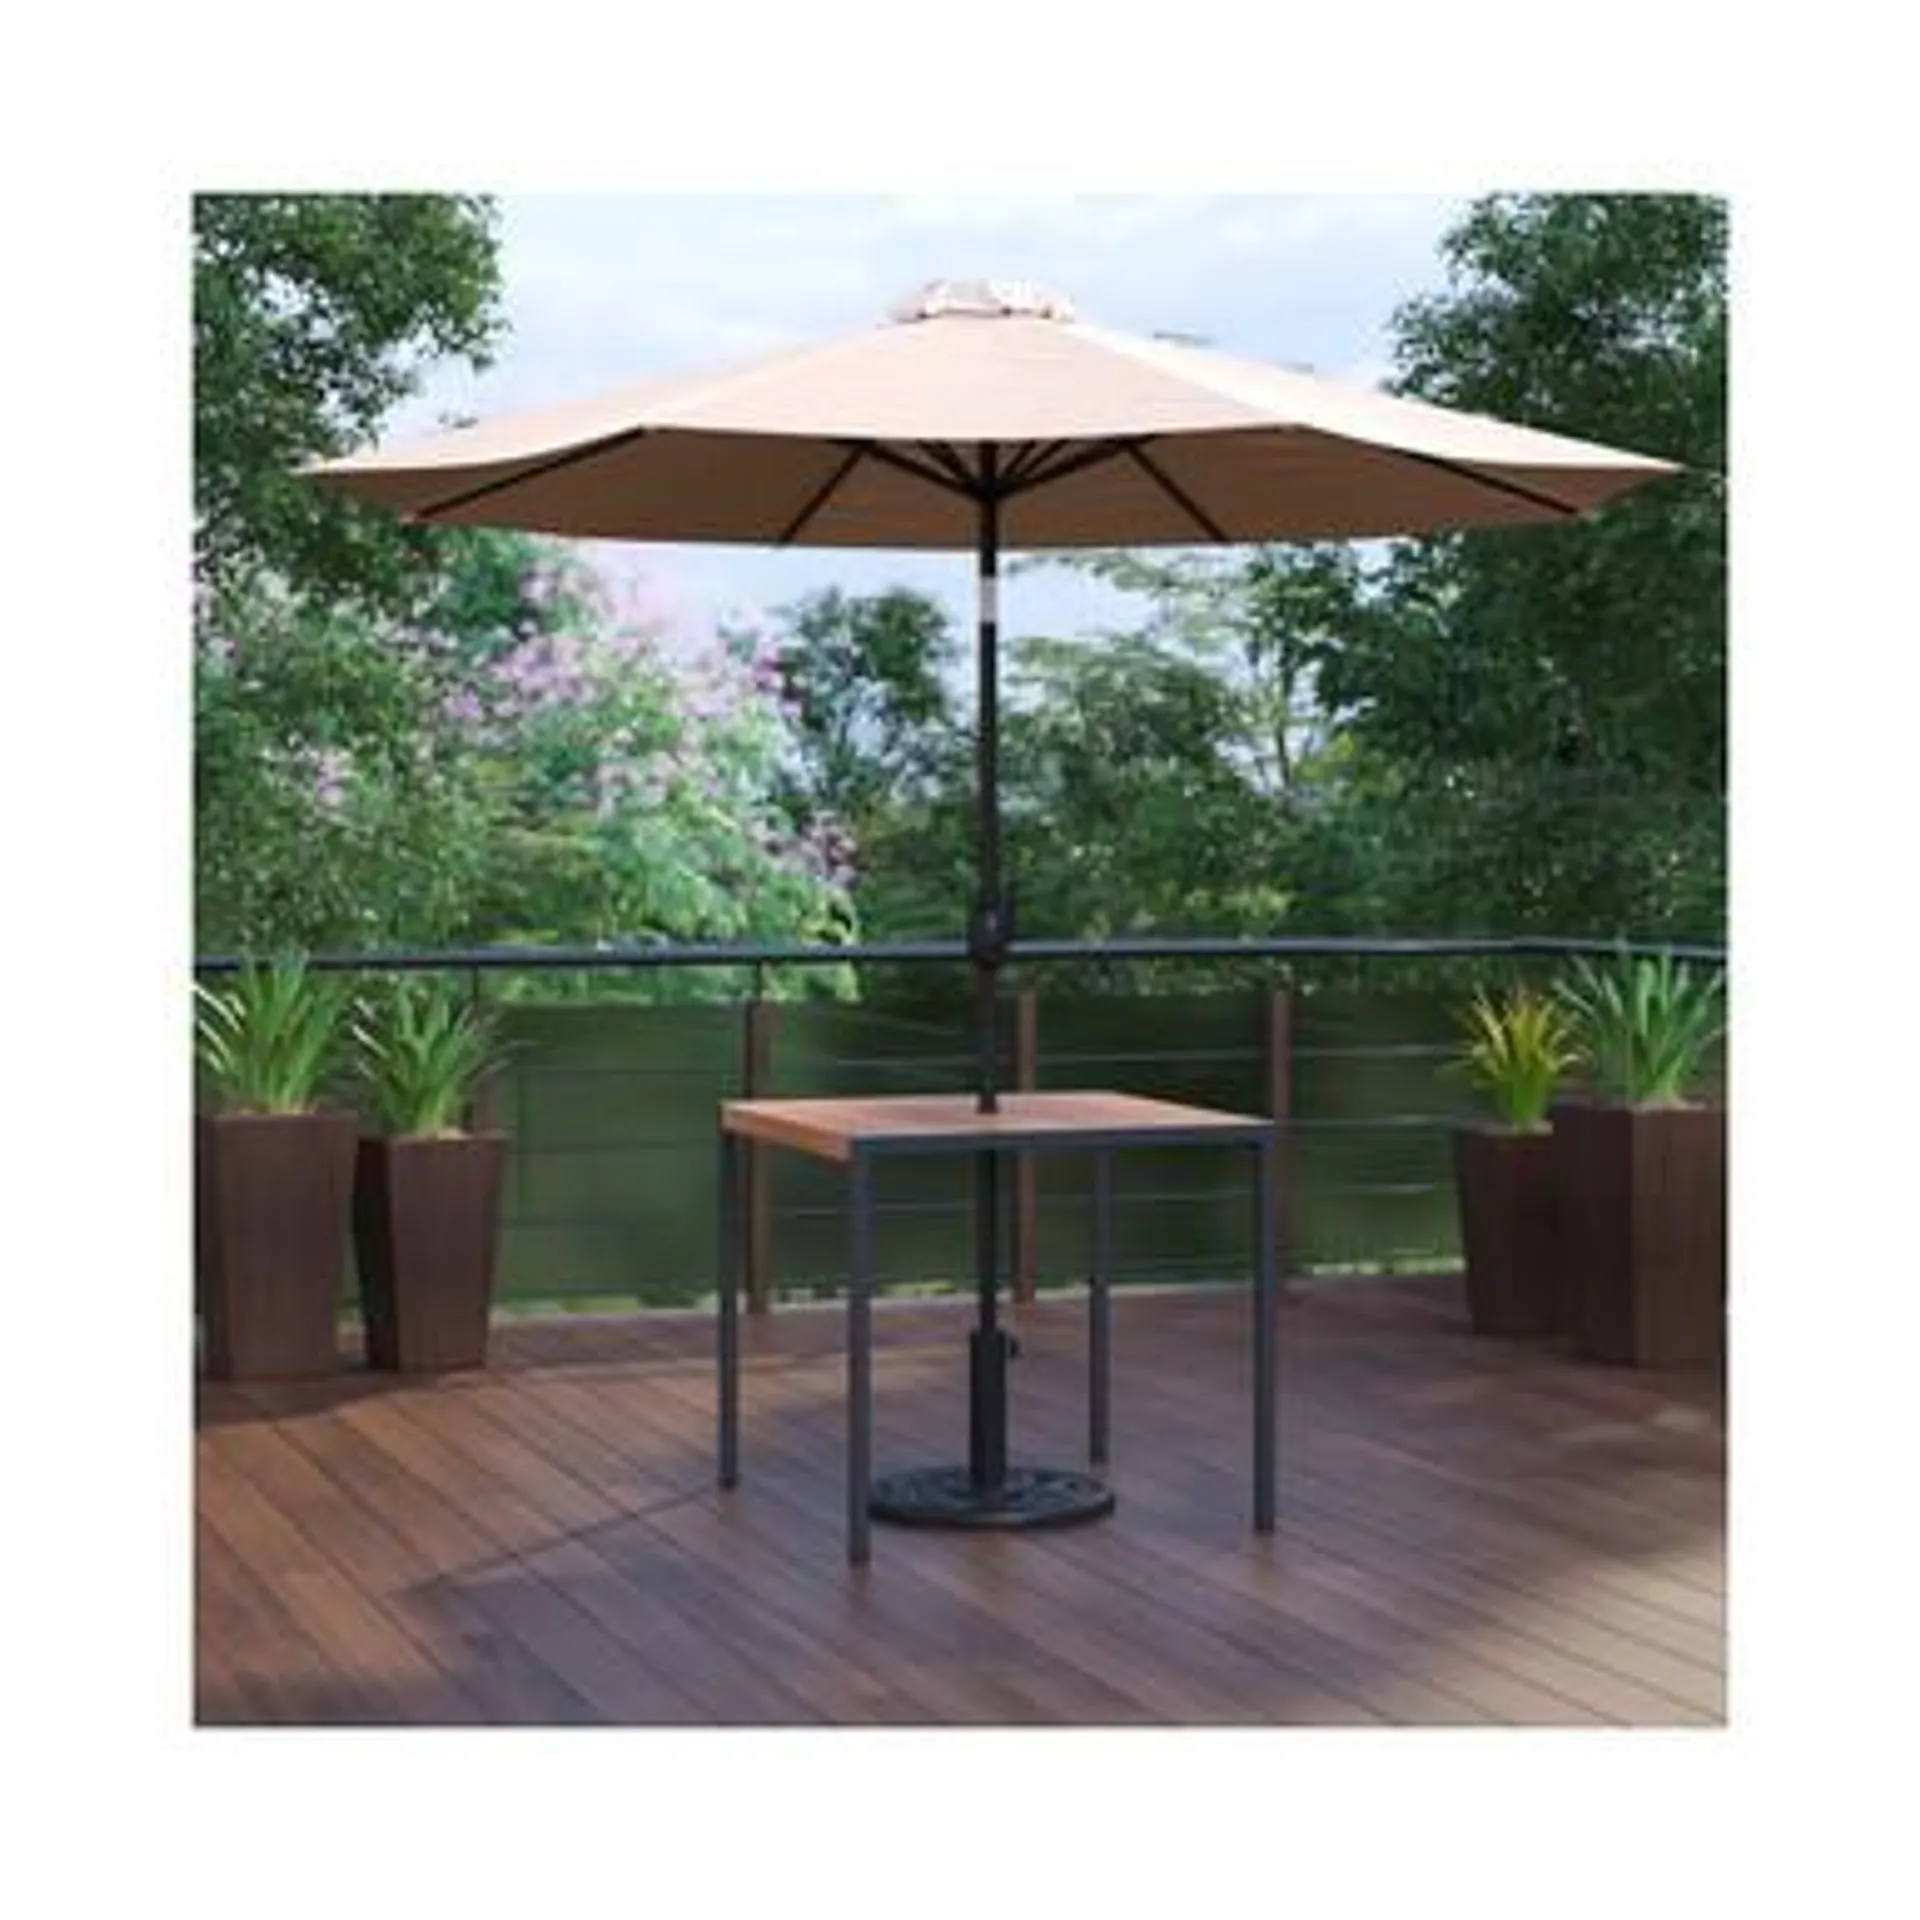 3 Piece Outdoor Patio Table Set 35” Square Synthetic Teak Patio Table with Umbrella Hole and Tan Umbrella with Base